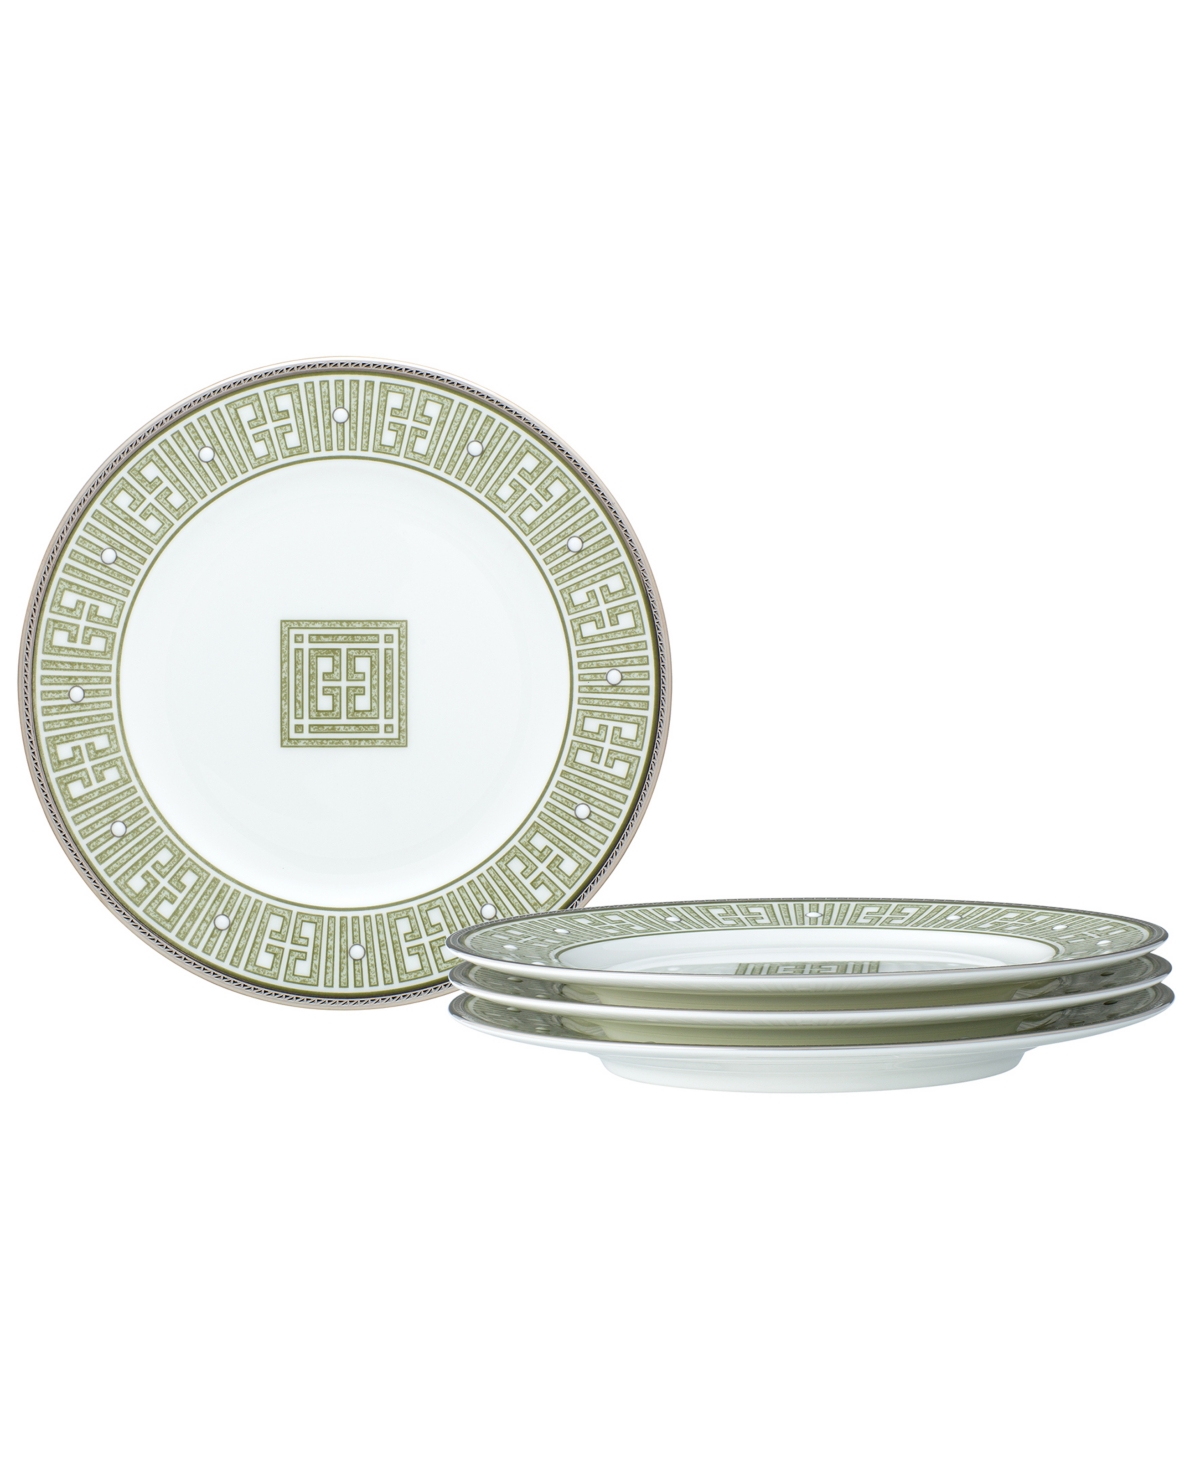 Noritake Infinity 4 Piece Bread Butter/appetizer Plate Set, Service For 4 In Green Platinum